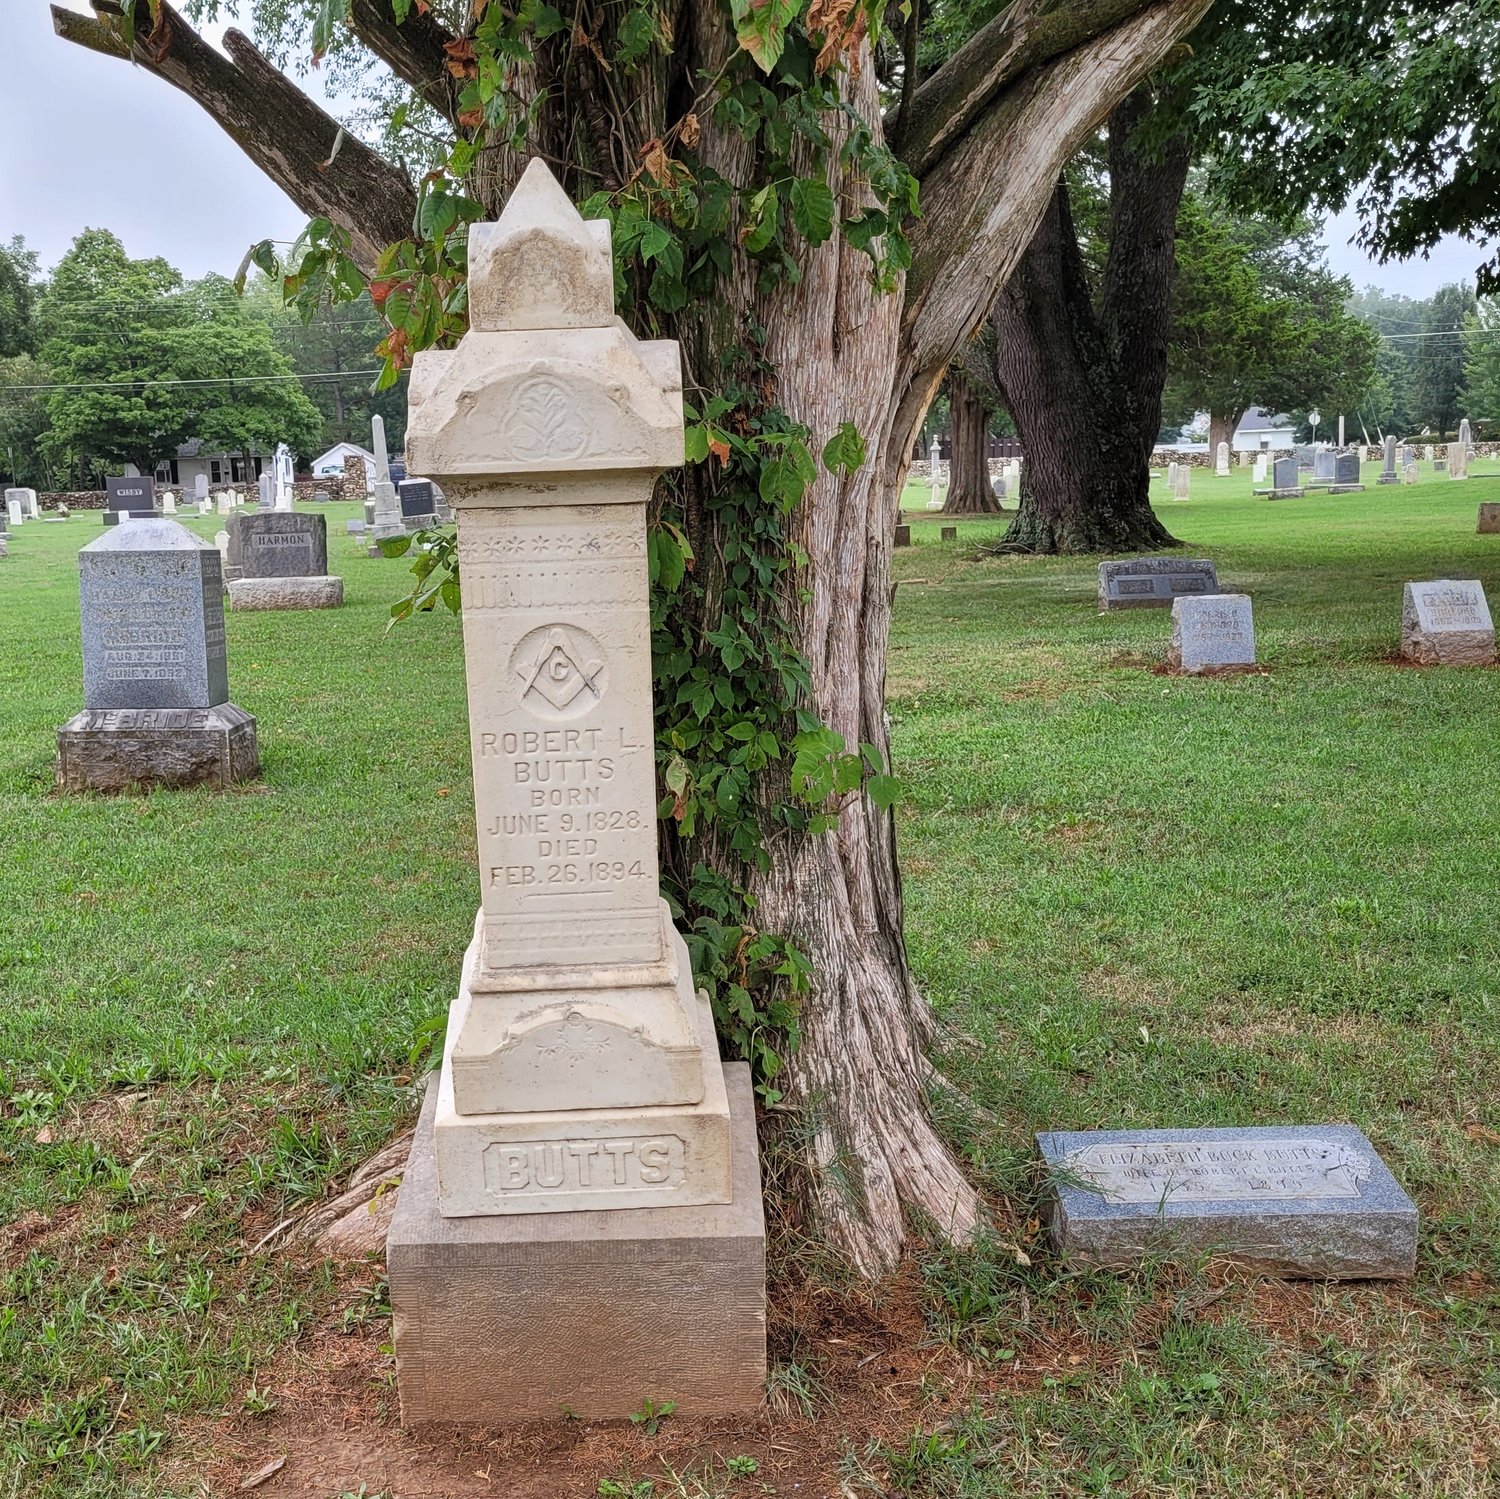 Doris Floyd recounts how she discovered this particular headstone “ It was so covered in vines and lichen that I missed it. I worked down here for hours and hours, then I was driving and though ‘Is there a stone behind all that growth?’ Sure enough there was. You can now see how nice it is.”